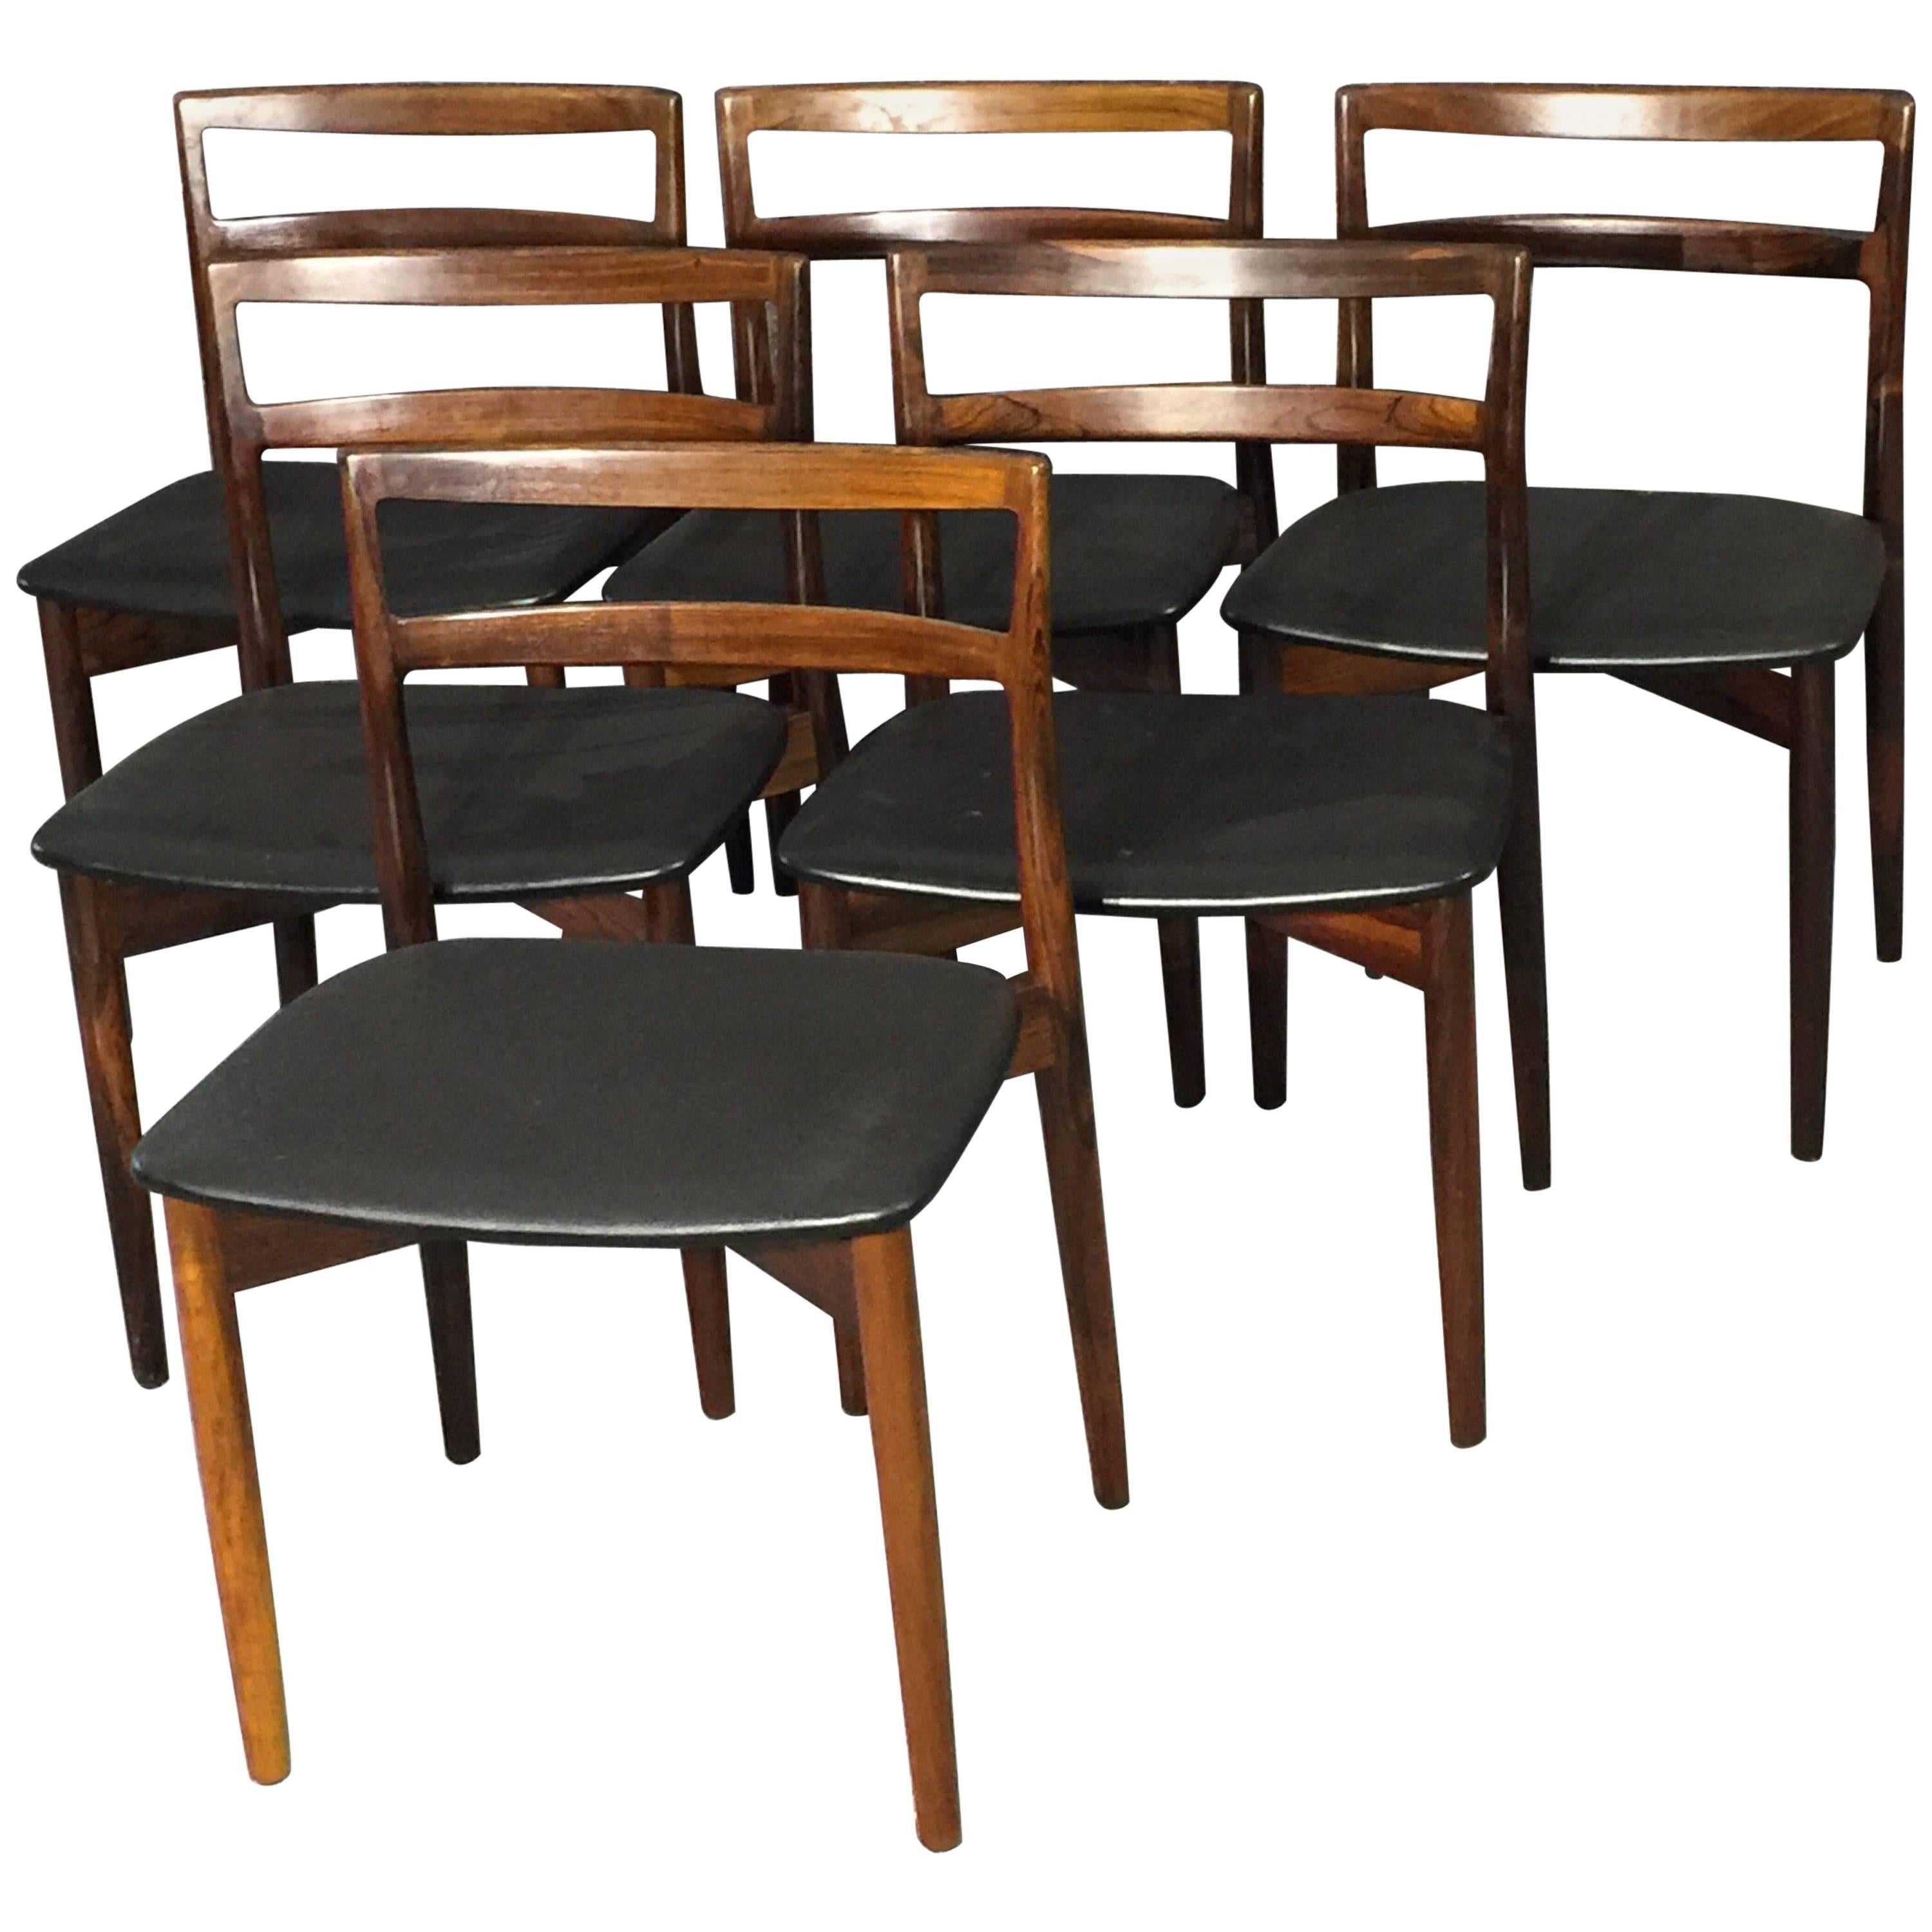 Harry Østergaard Dining Chairs Model 61, Mid-Century Modern Rosewood, 1960s For Sale